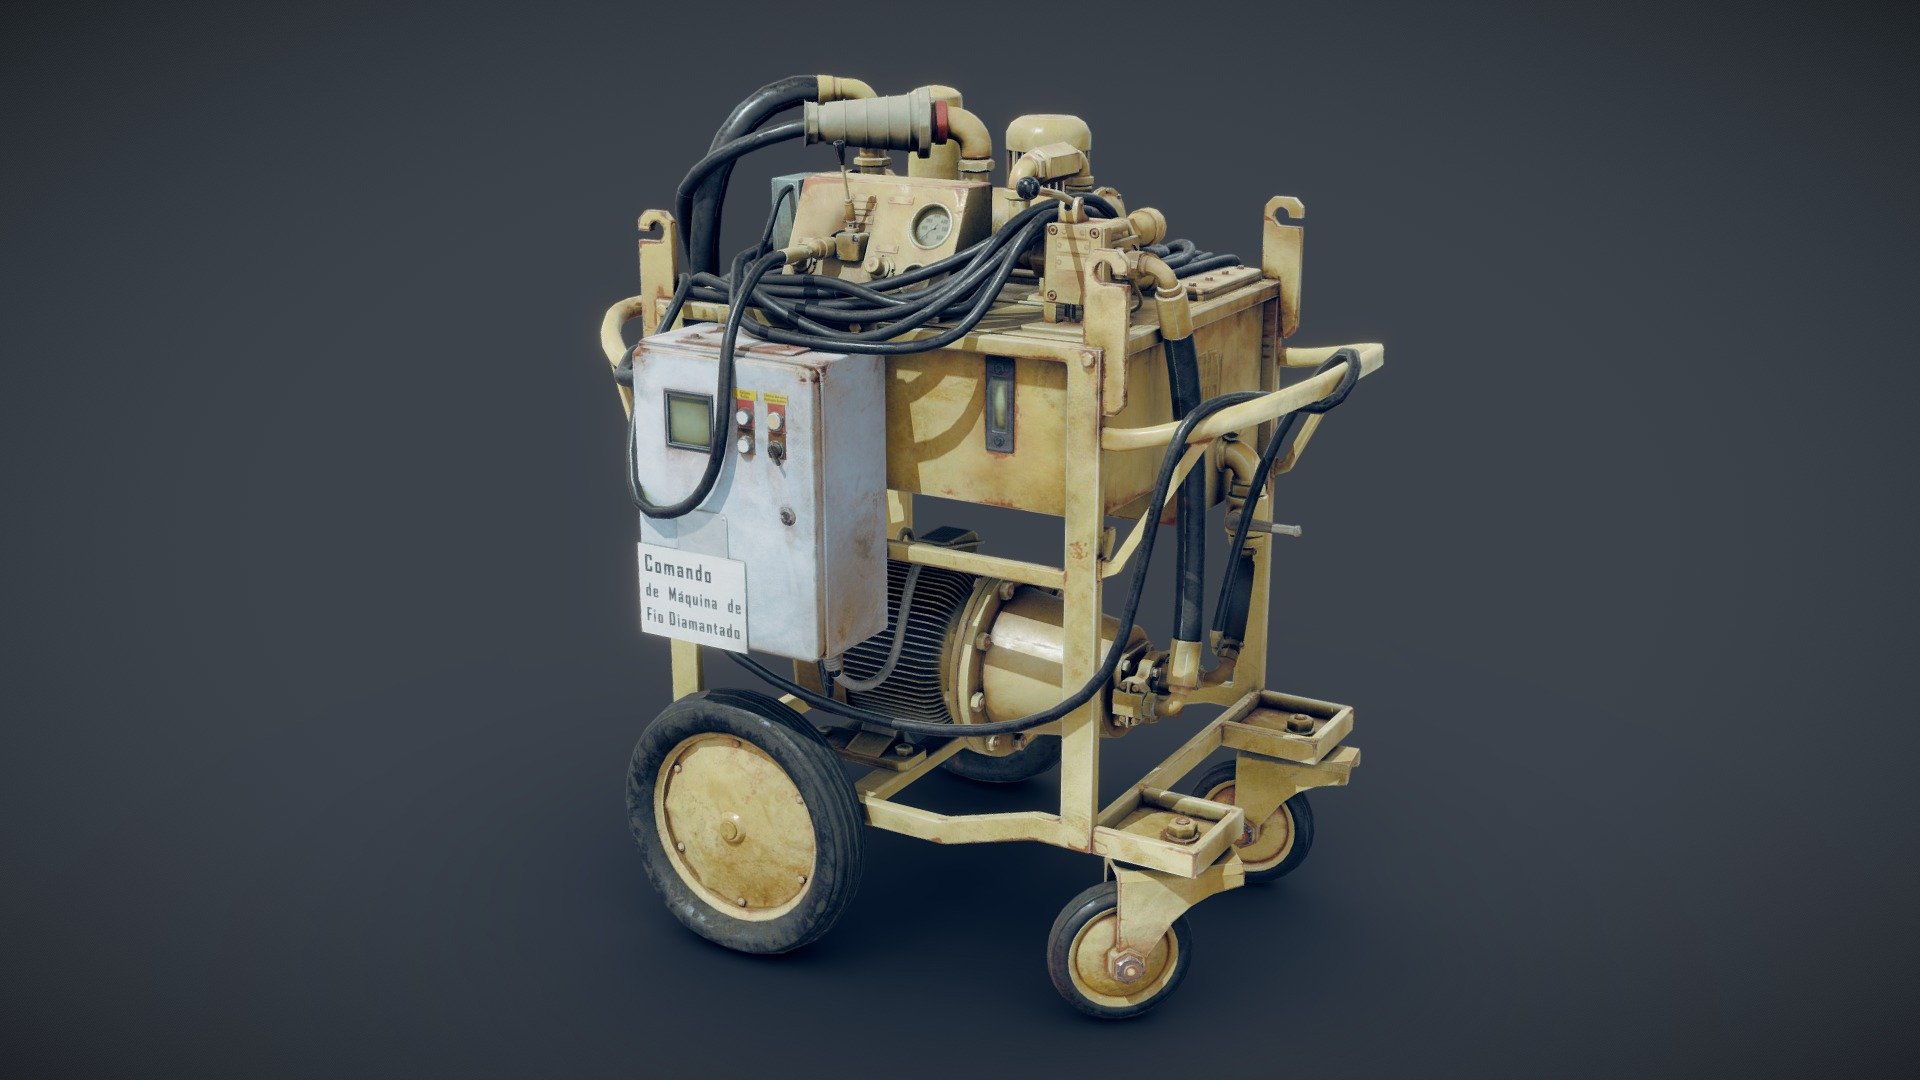 Old Rusty Generator

Modelled with 3ds Max
Textured with Substance Designer &amp; Painter

Reference used: https://www.textures.com/download/machineryheavy0052/15025 - Old Generator - 3D model by gertnerarts 3d model